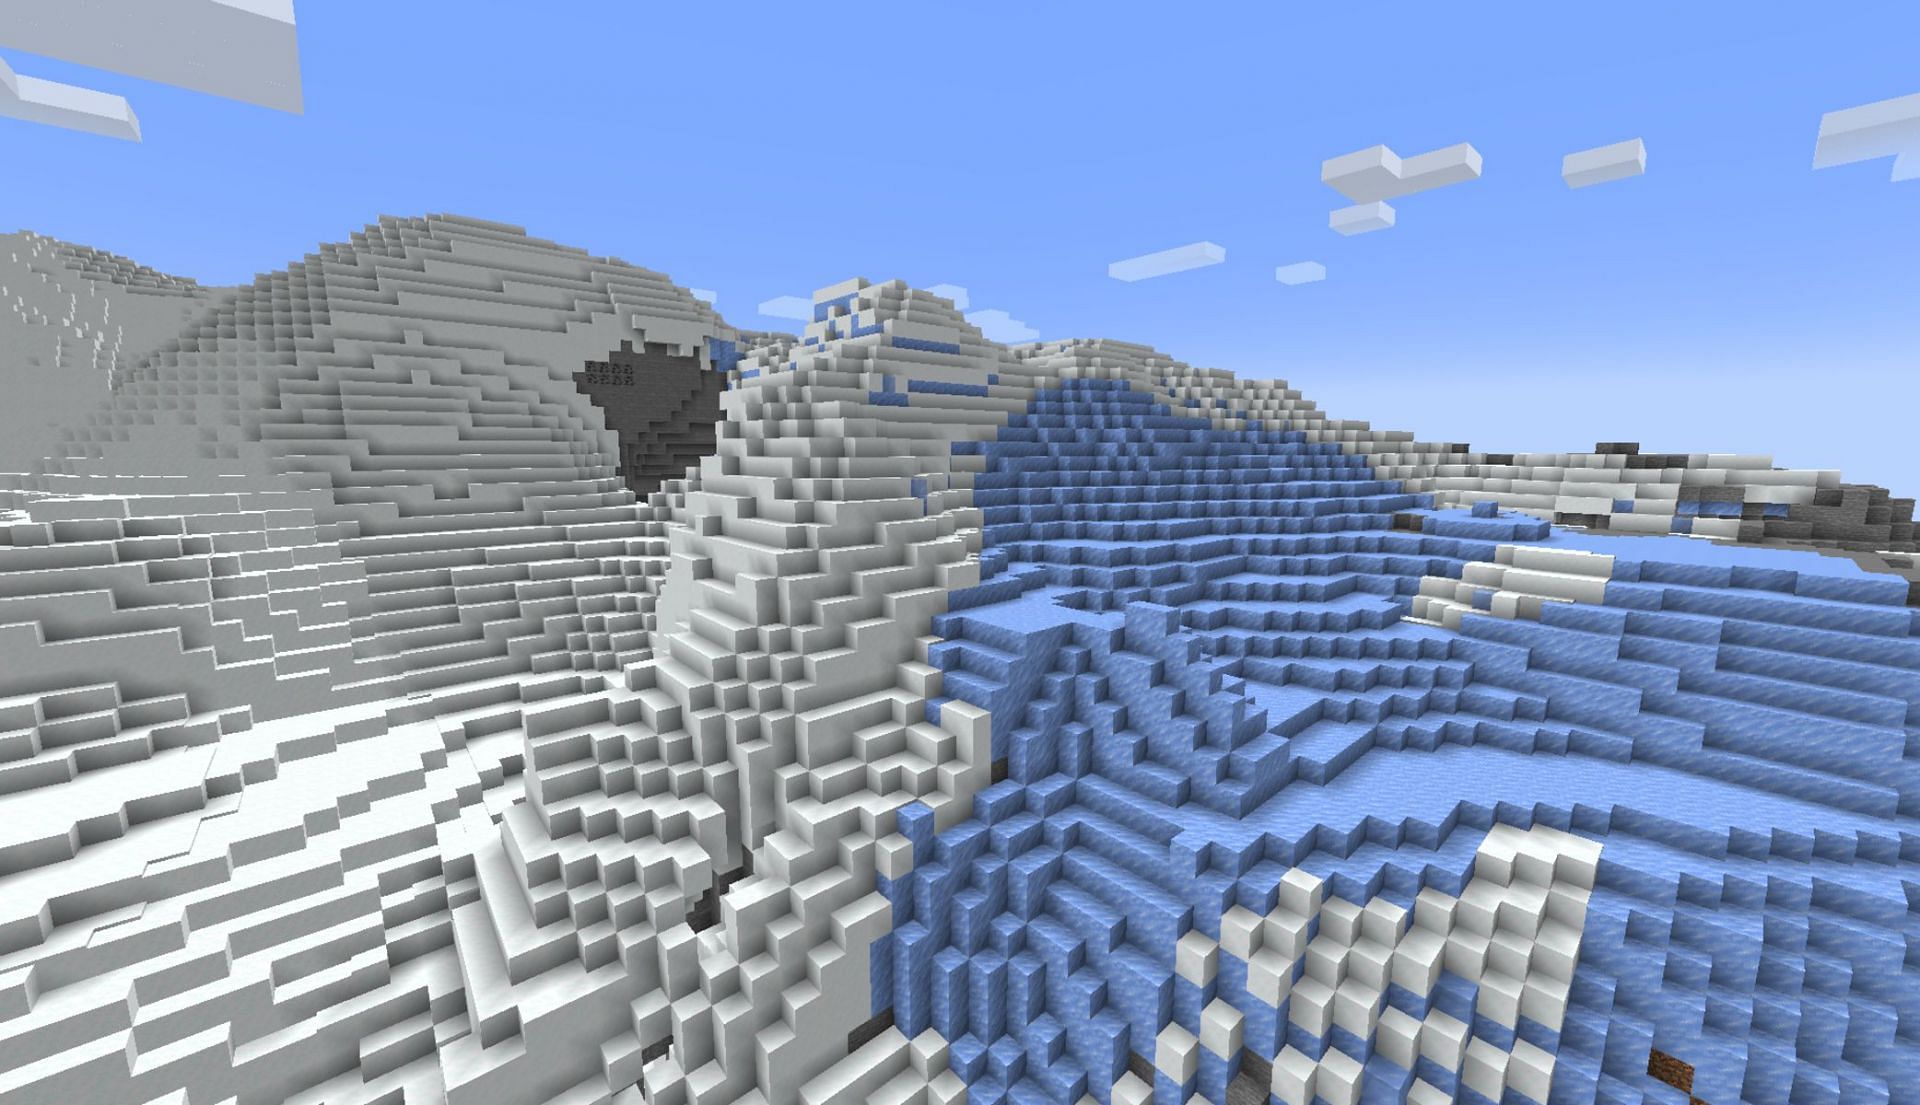 A frozen peak biome, one of the new biome variations provided to mountains in Minecraft 1.18 (Image via Mojang)